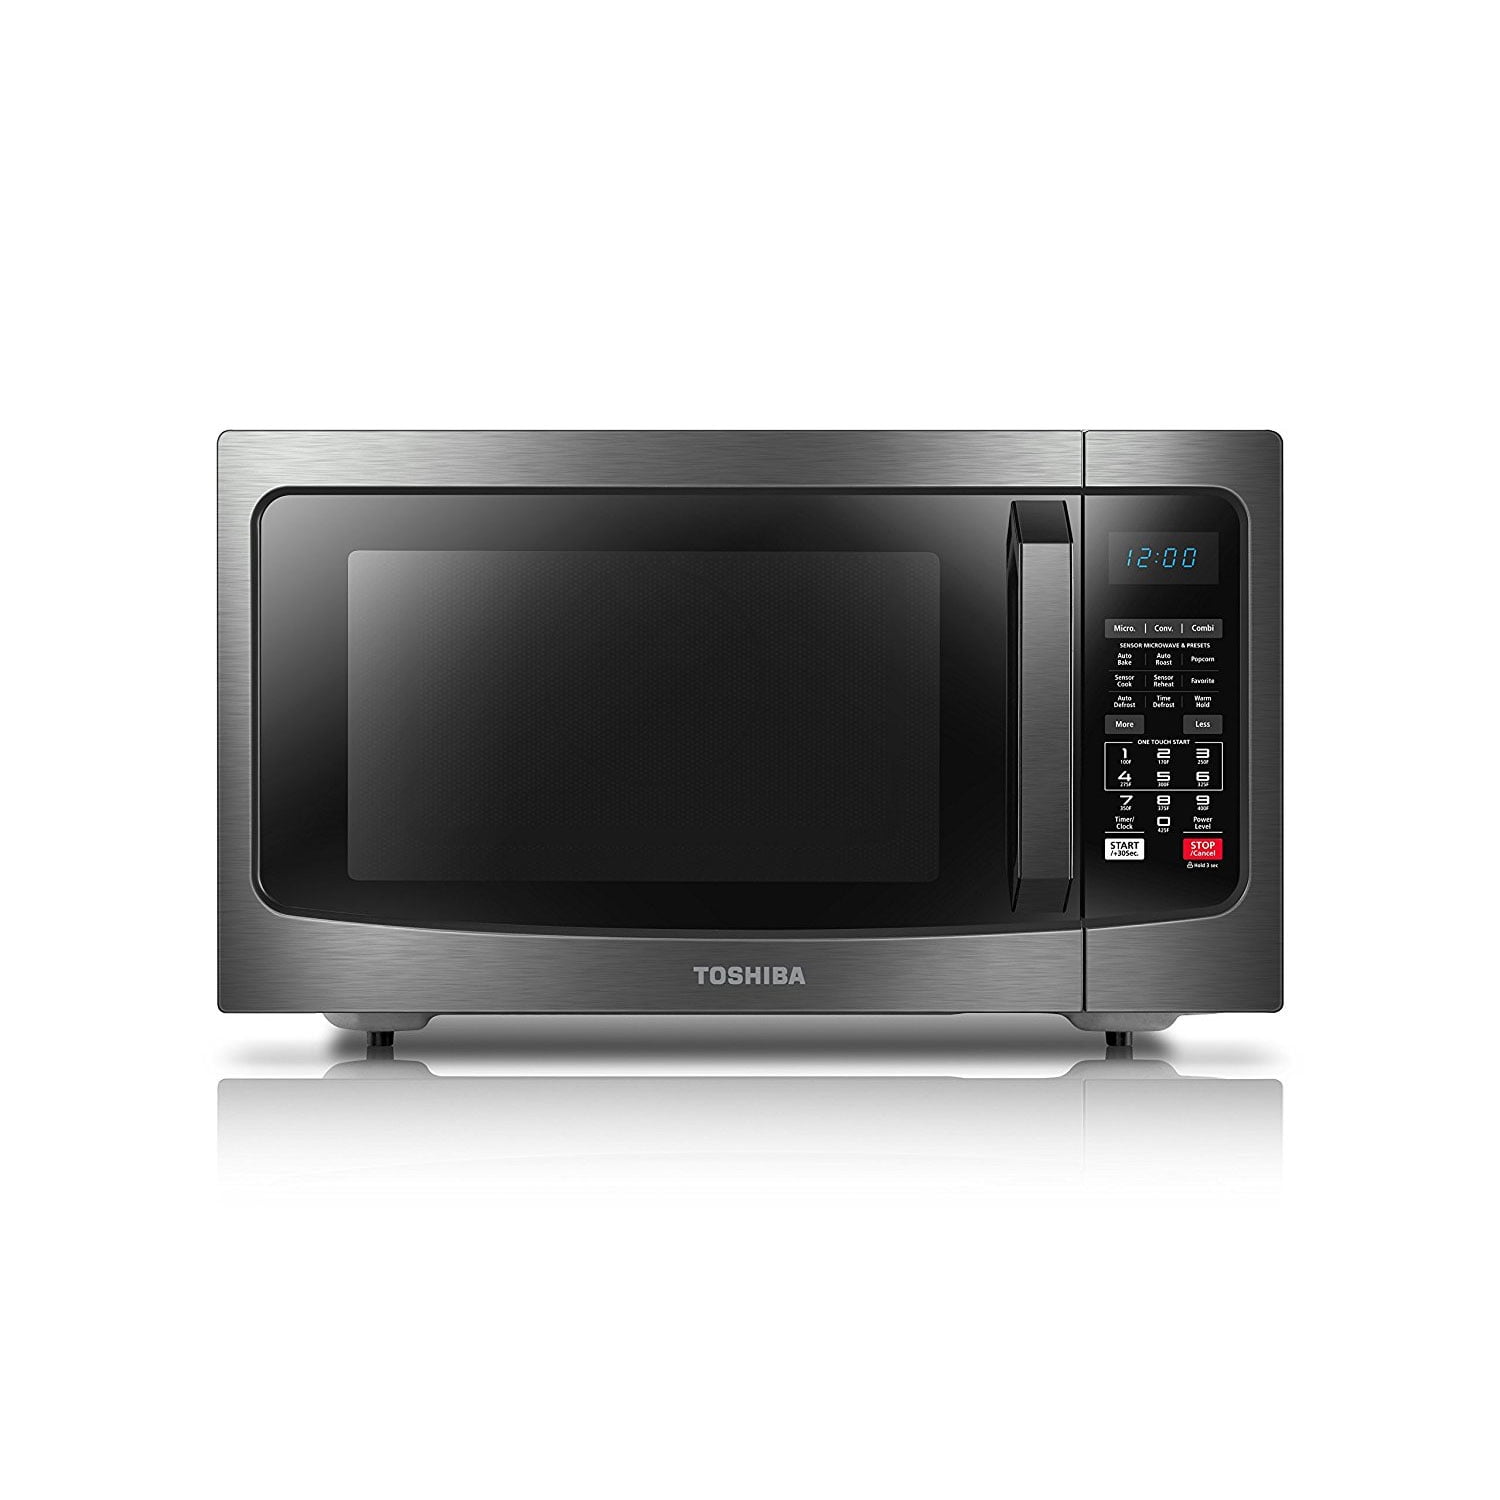 Photo 1 of (DENTED TOP) Toshiba Smart Sensor LED Light 1.5 Ft Stainless Convection Microwave Oven, Black